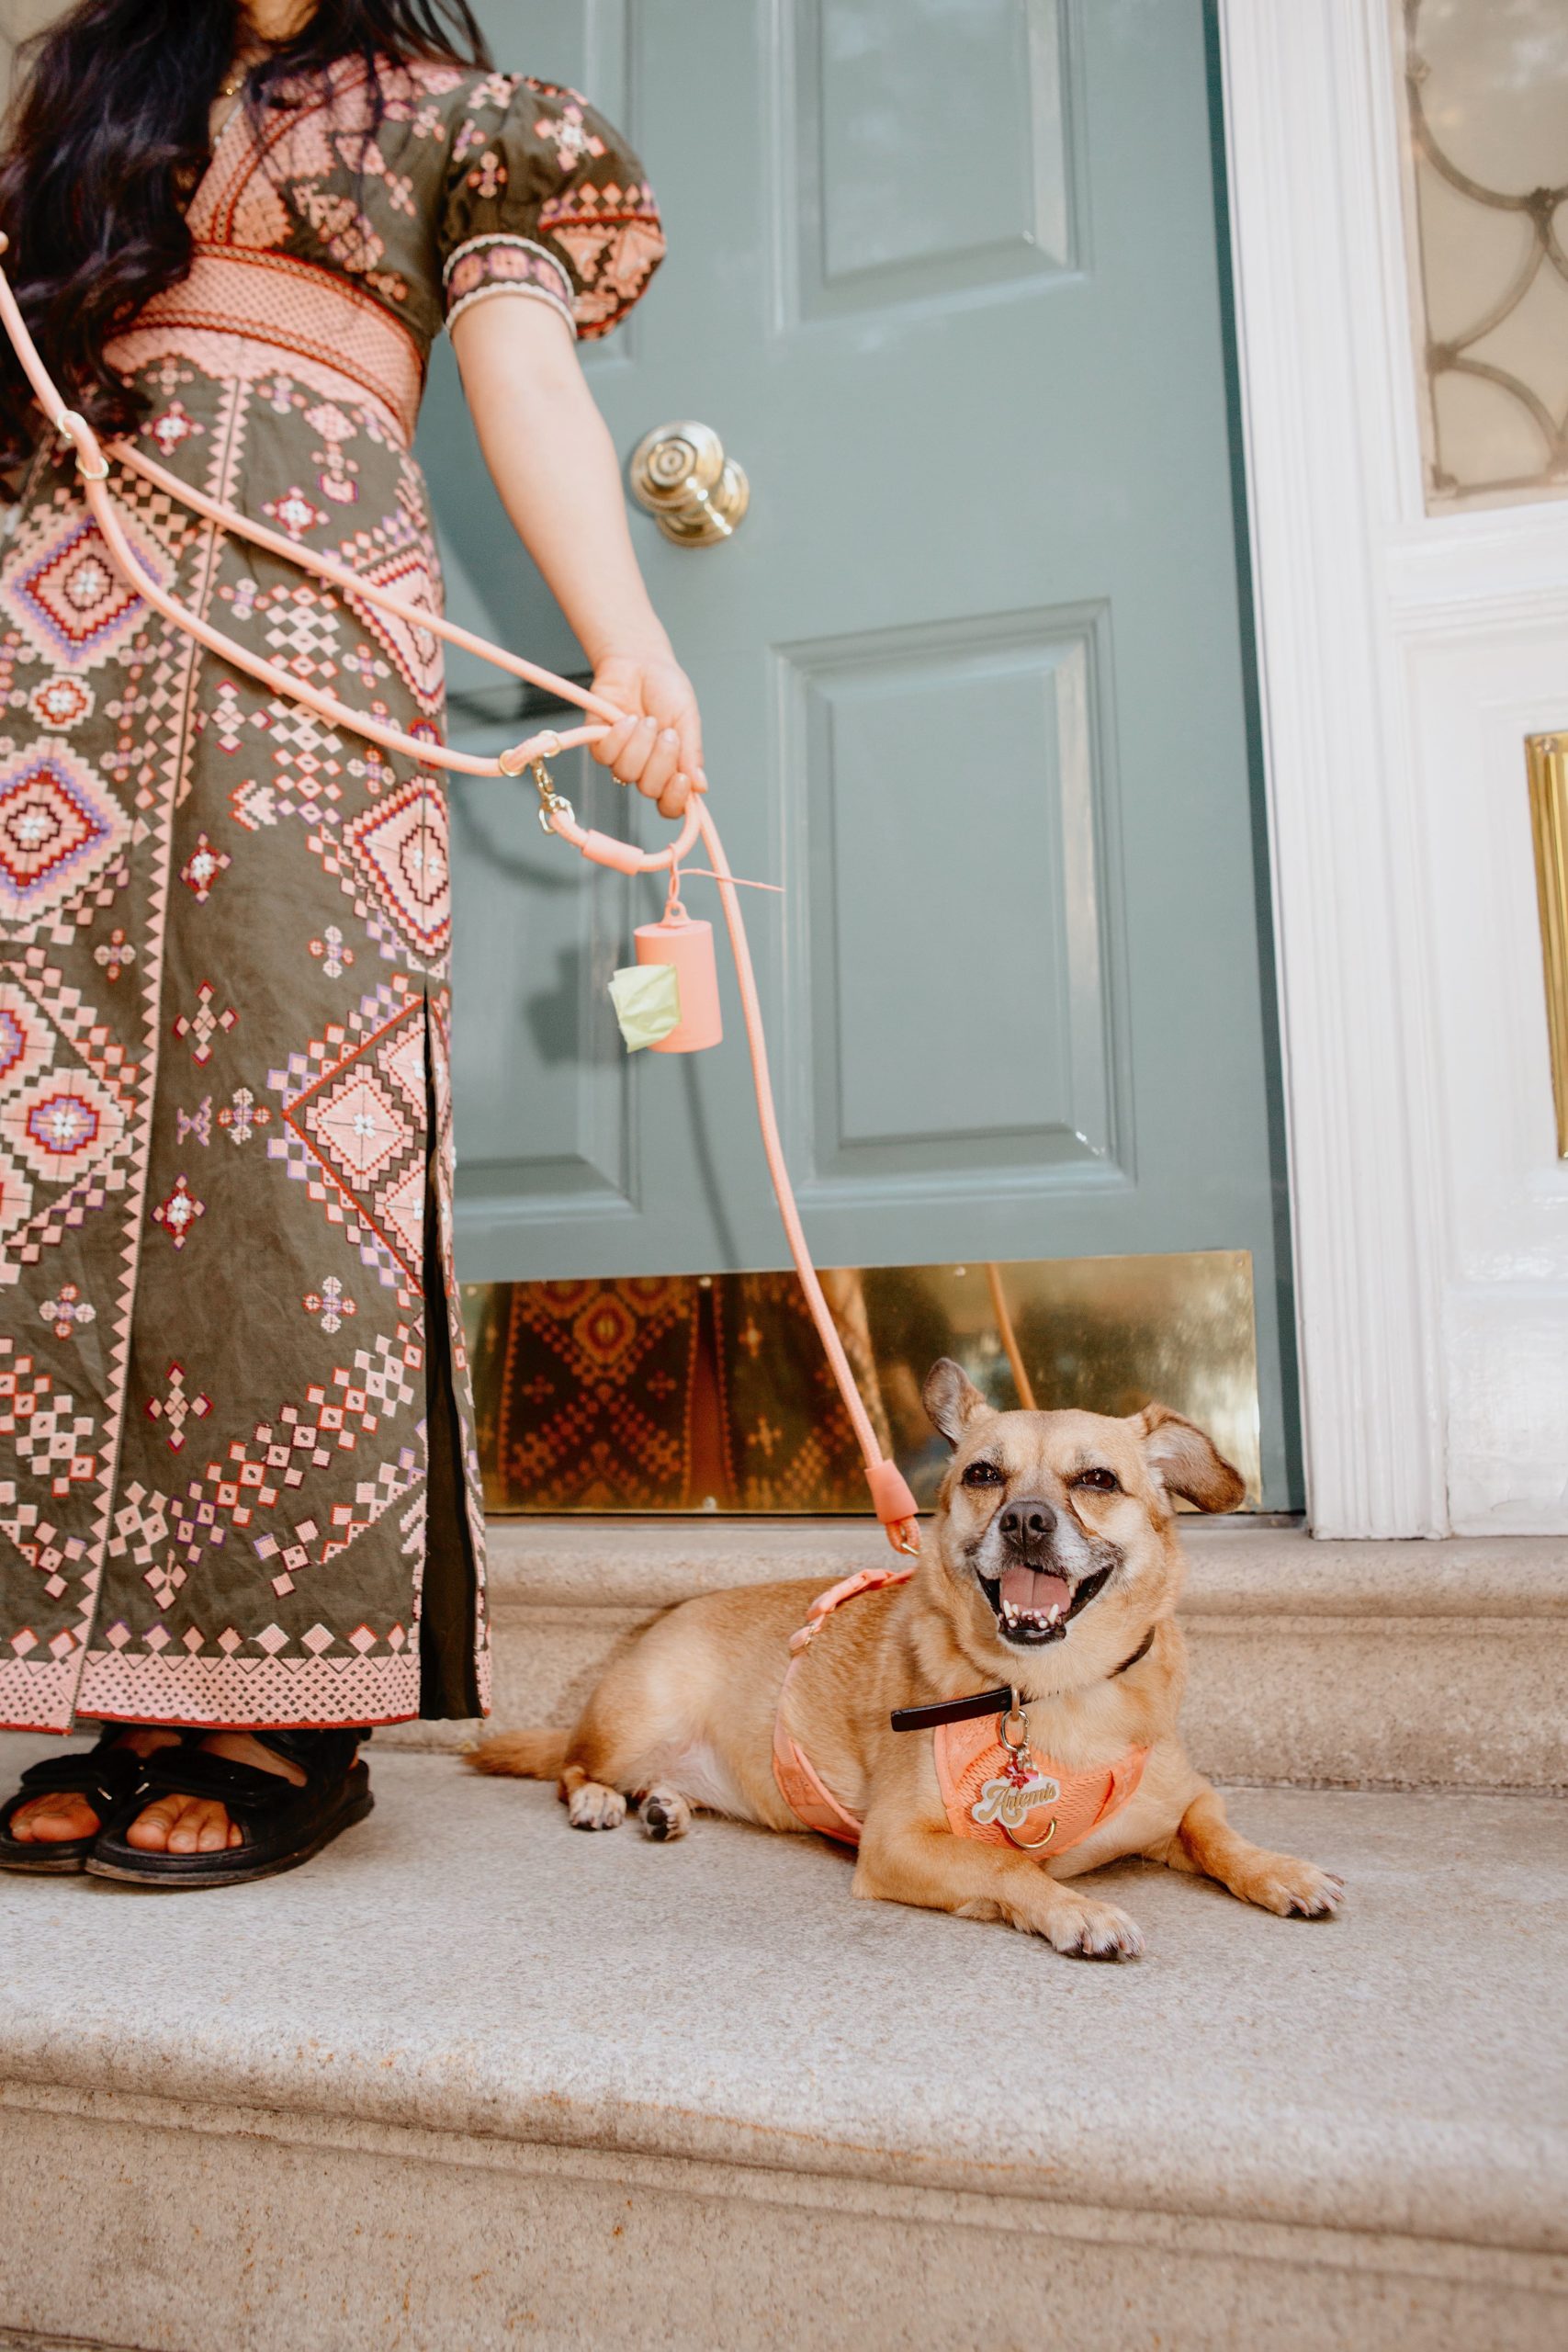 Awoo Pets leash and harness, photographed for Argos & Artemis by Tayler Smith.